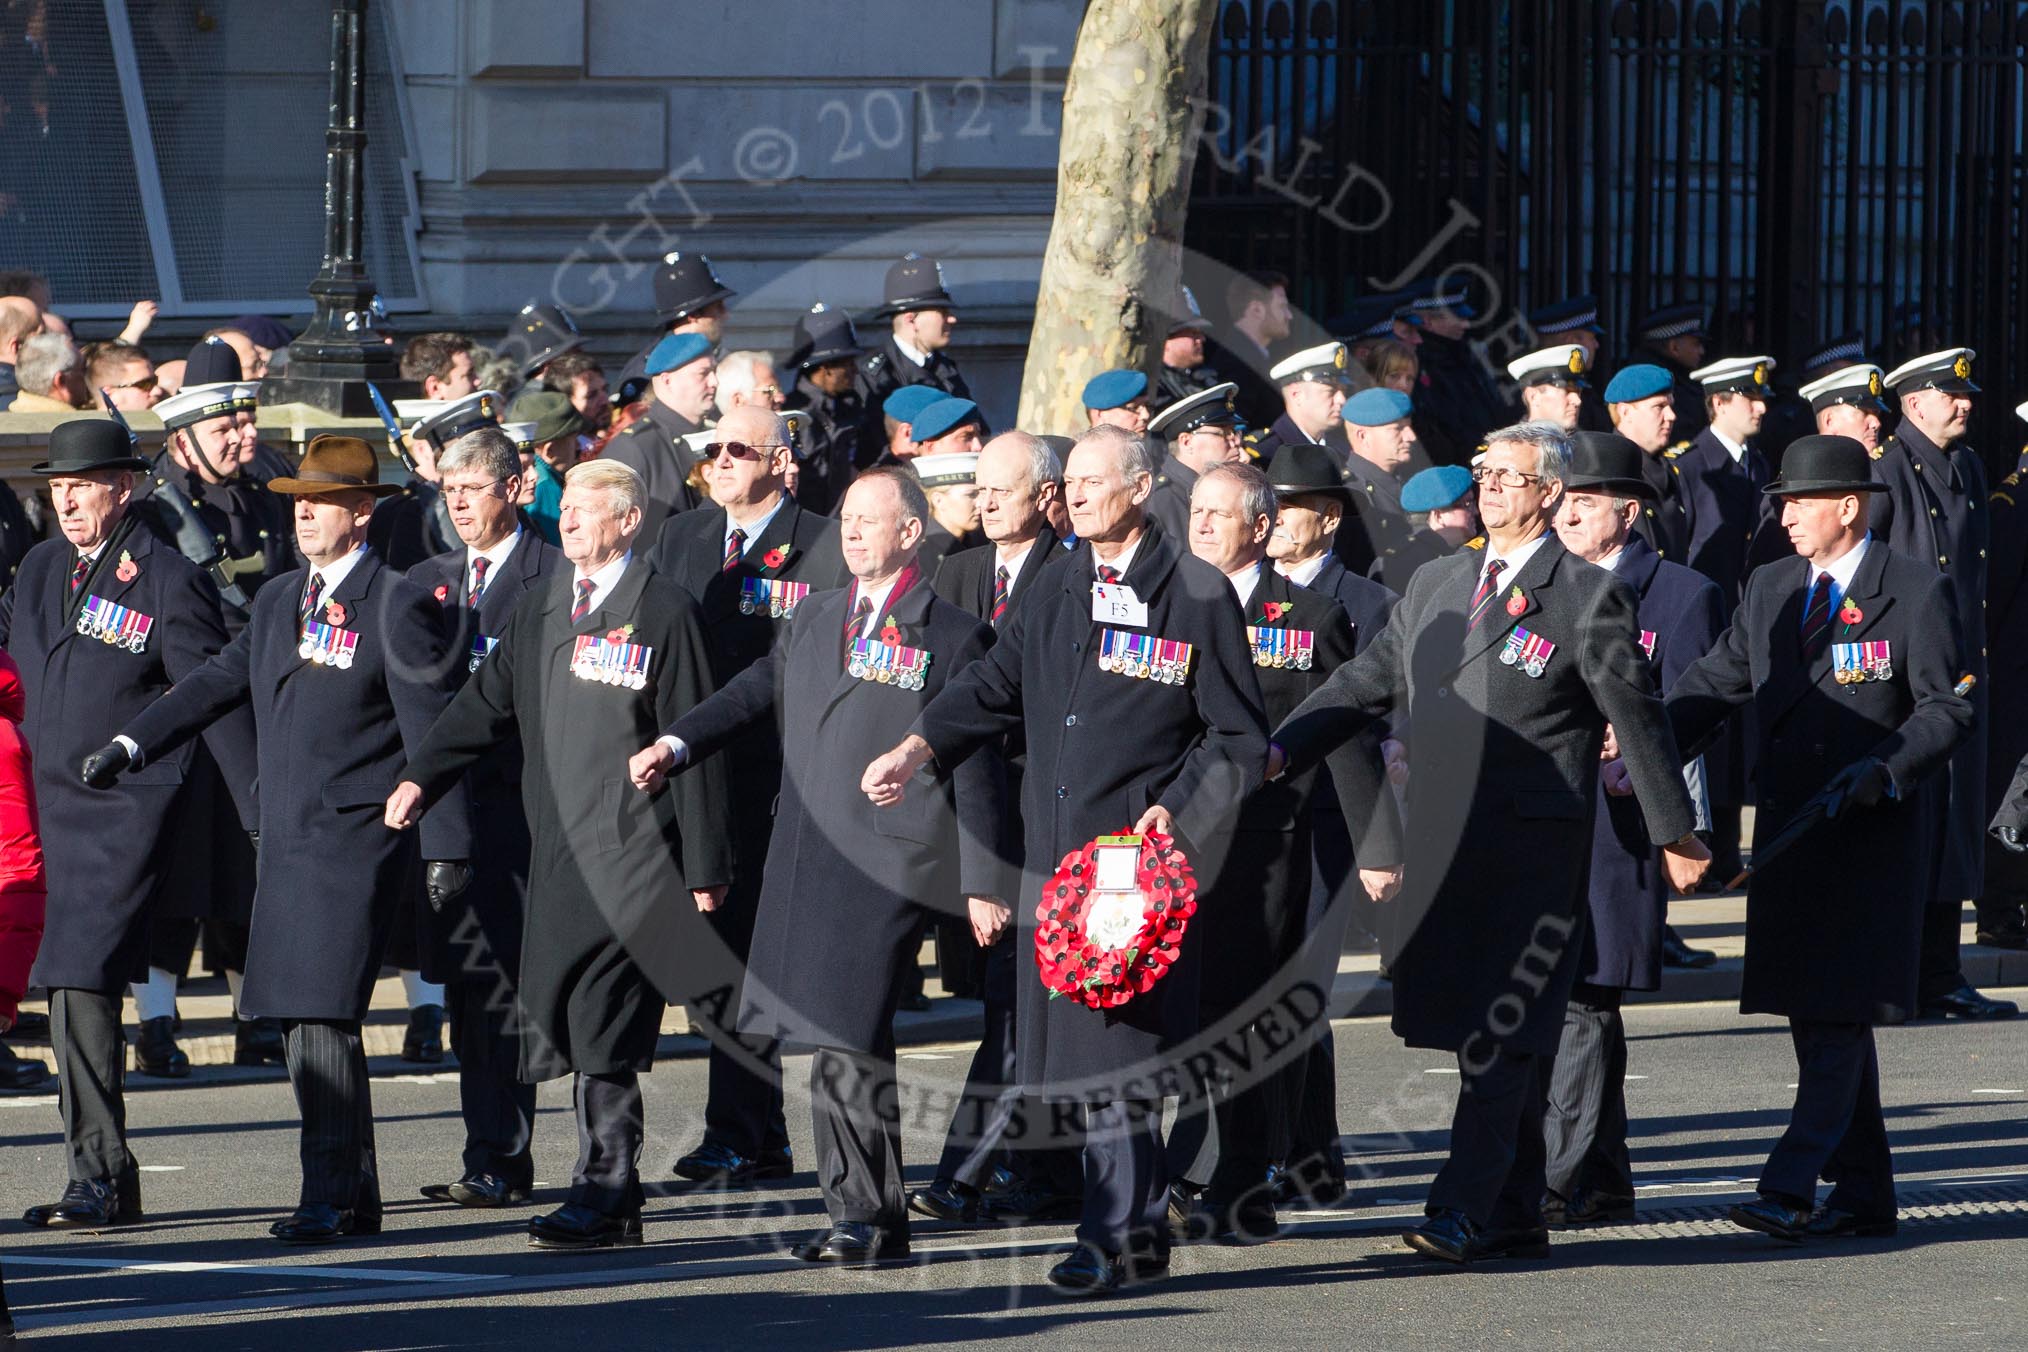 Remembrance Sunday 2012 Cenotaph March Past: Group F5 - Queen's Bodyguard of The Yeoman of The Guard..
Whitehall, Cenotaph,
London SW1,

United Kingdom,
on 11 November 2012 at 11:45, image #414